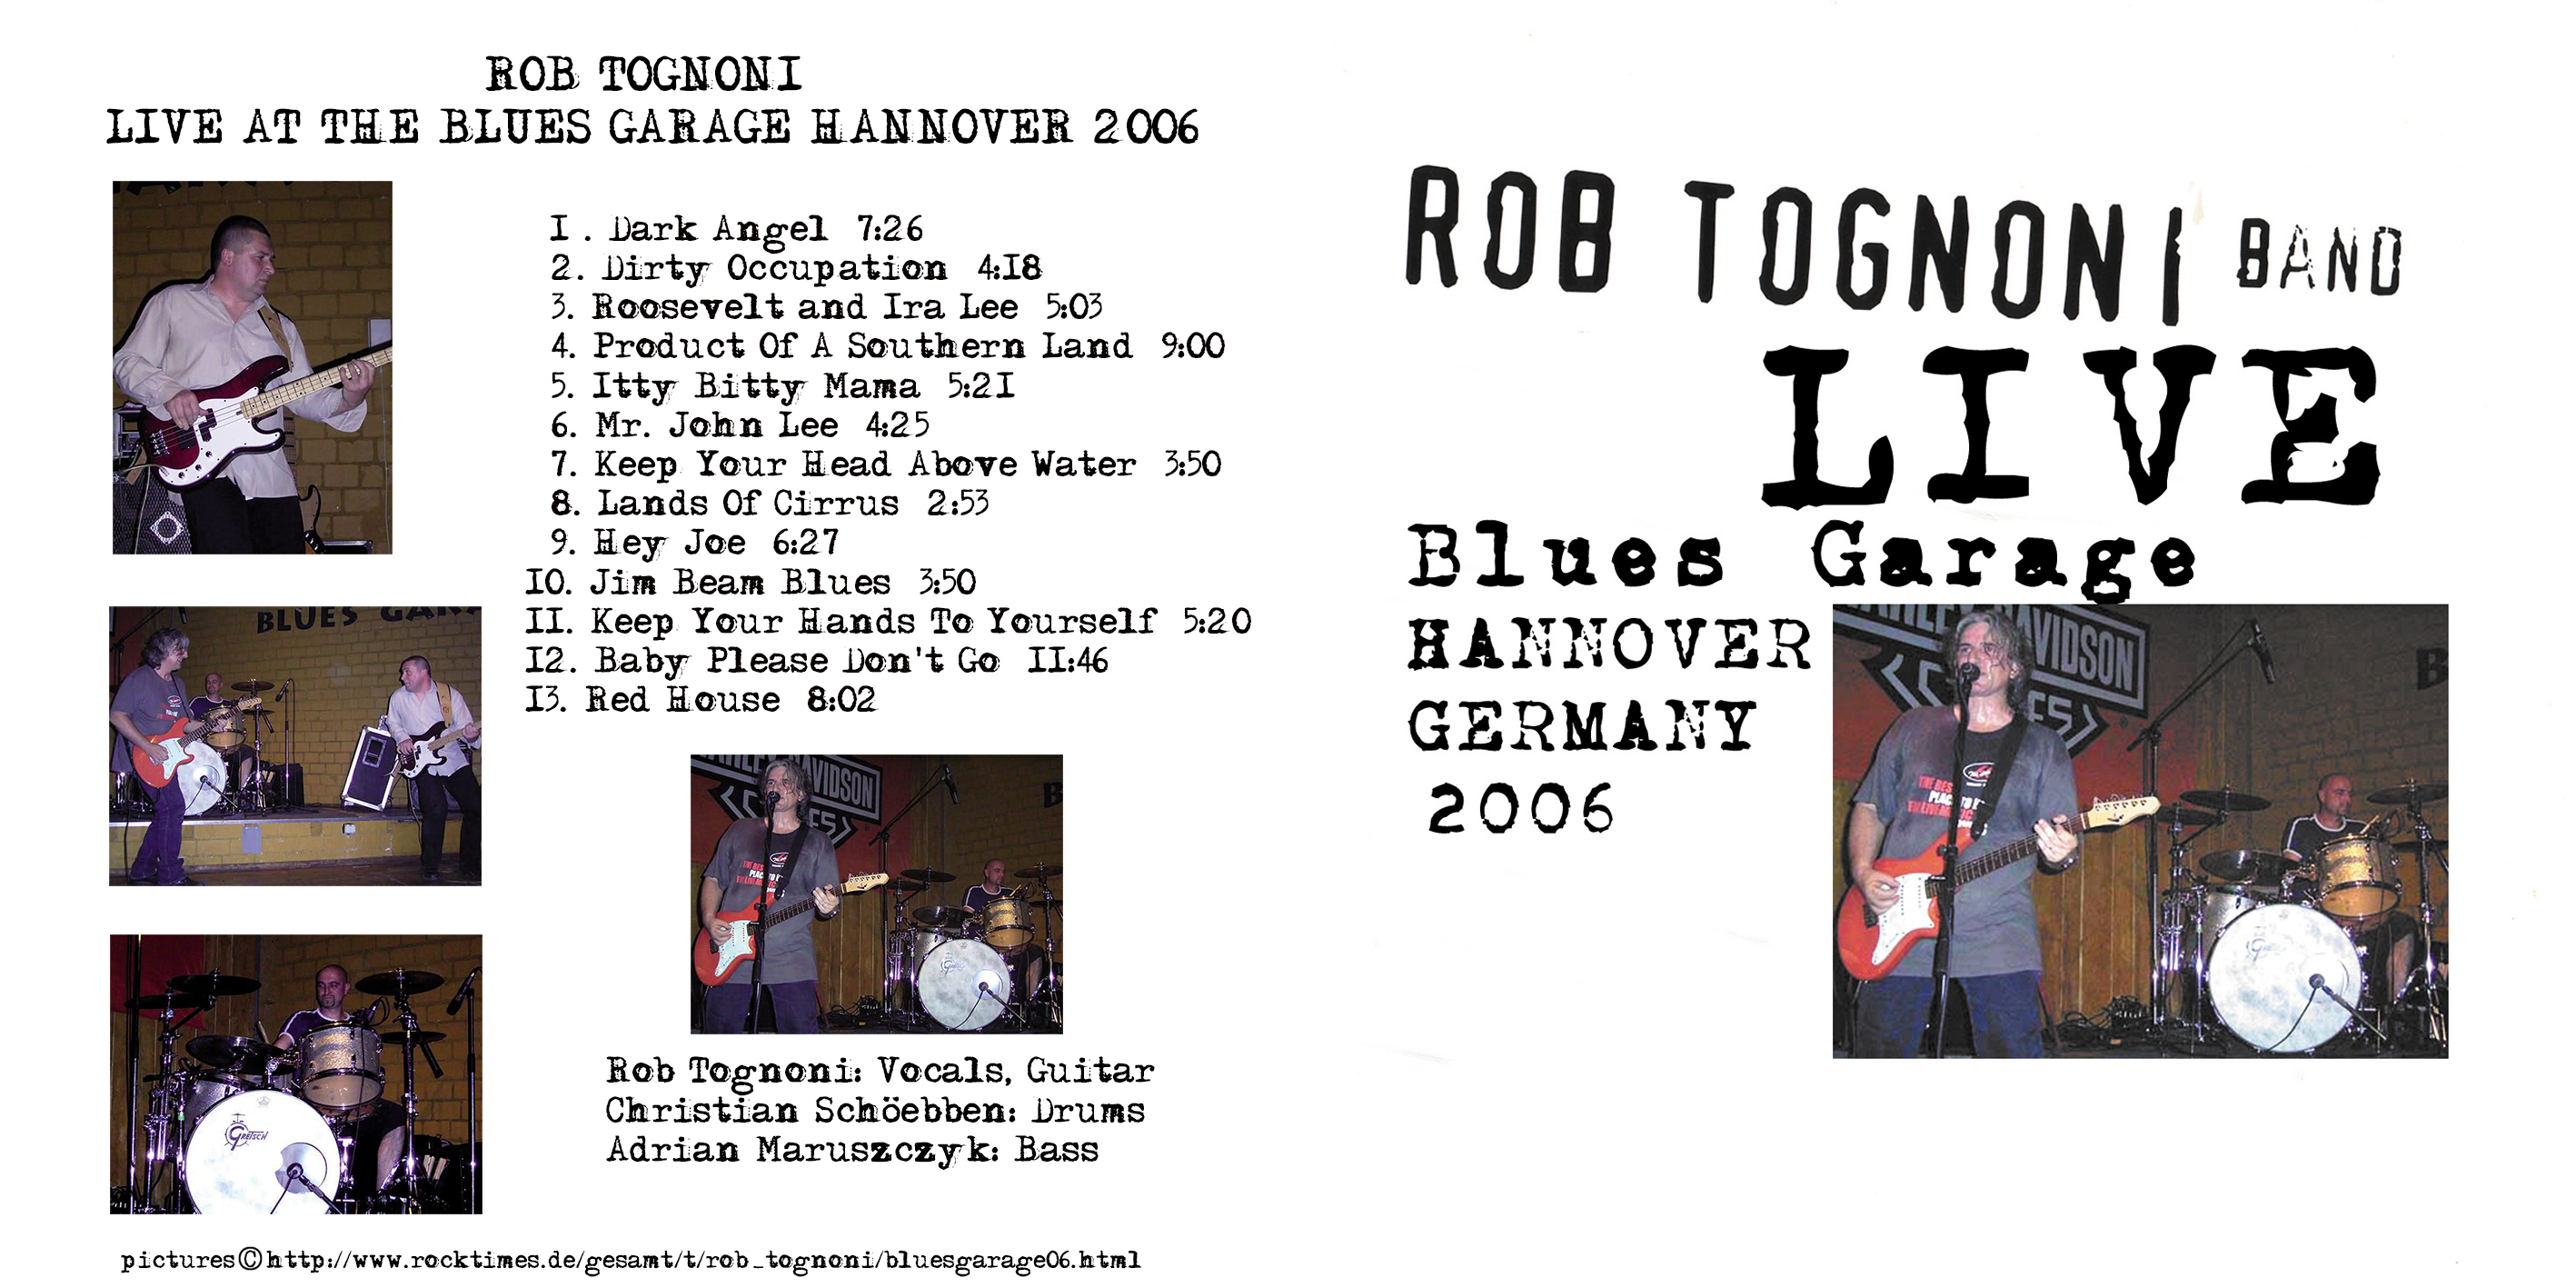 rob tognoni cd live at blues garage hannover 2006 cover out